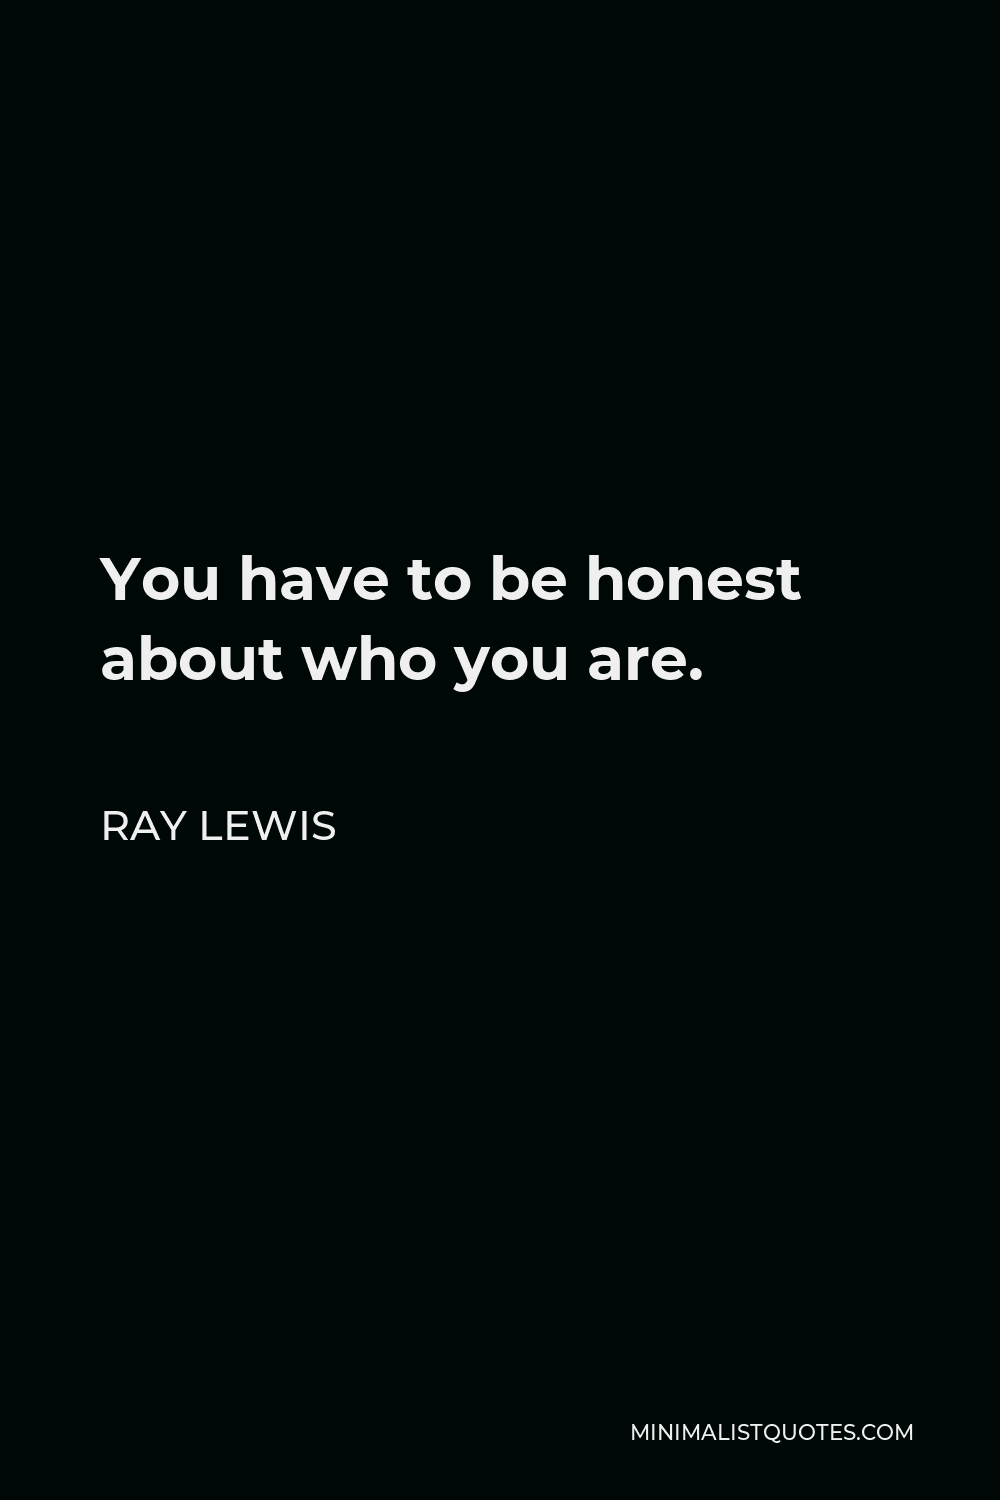 Ray Lewis Quote - You have to be honest about who you are.